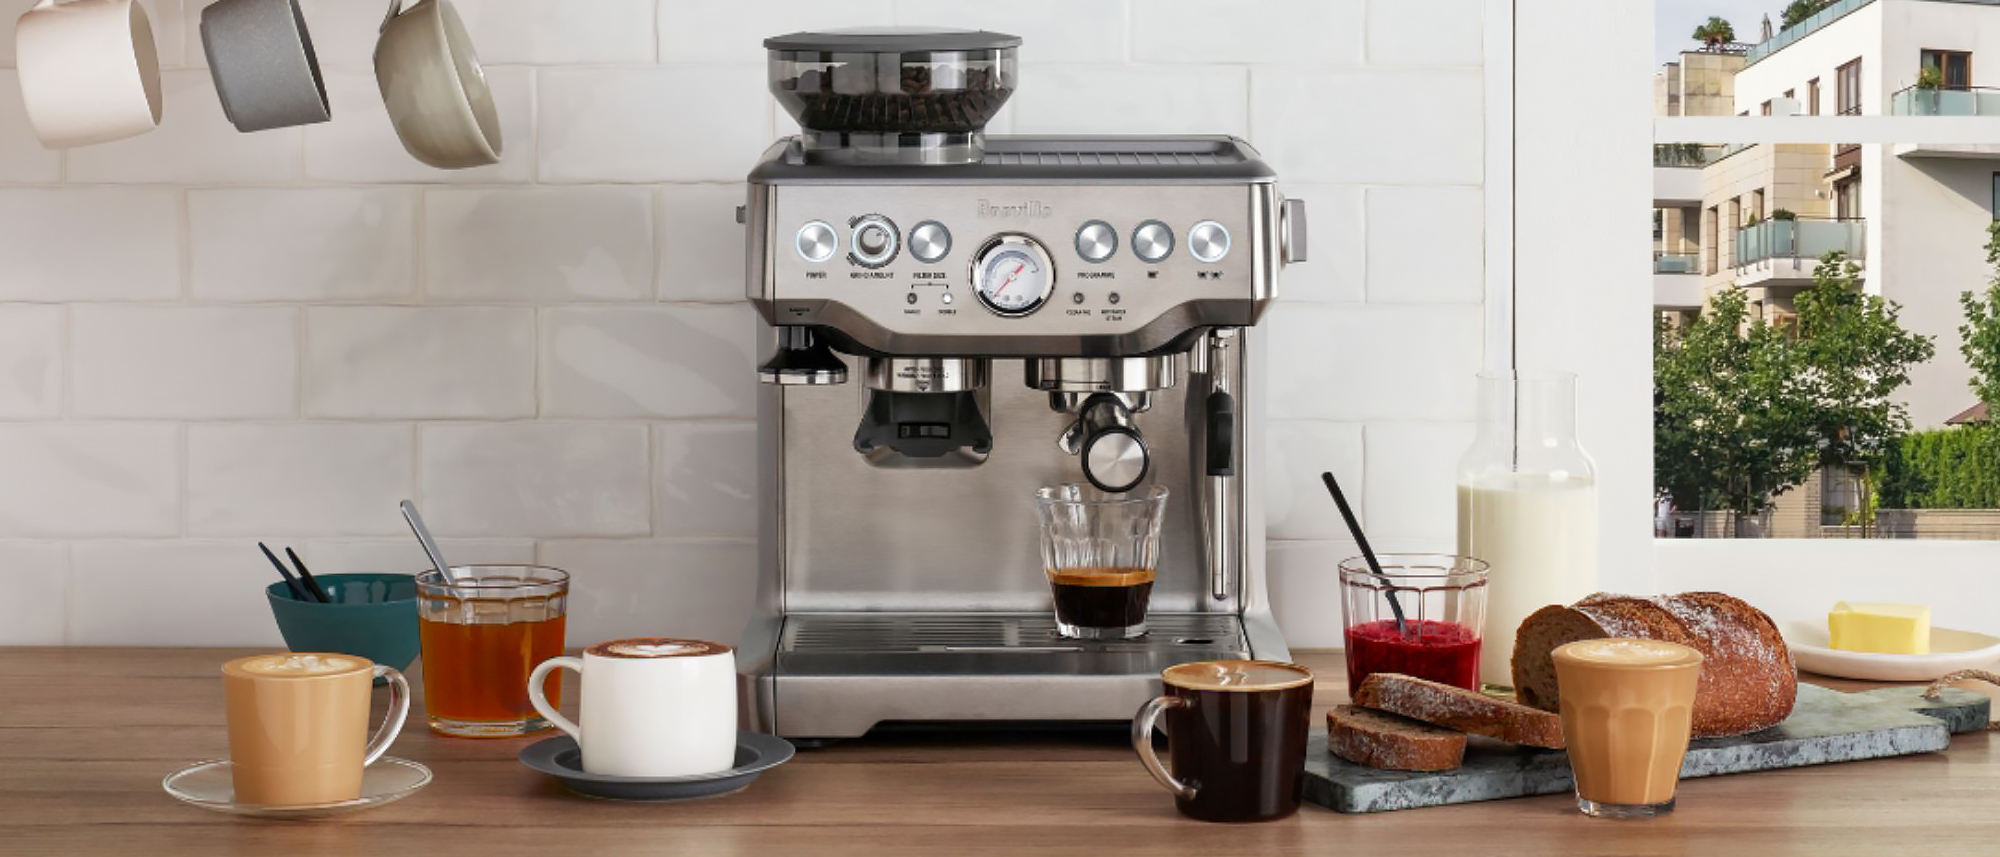 How to Clean Breville Barista Express using Tablets, Breville's